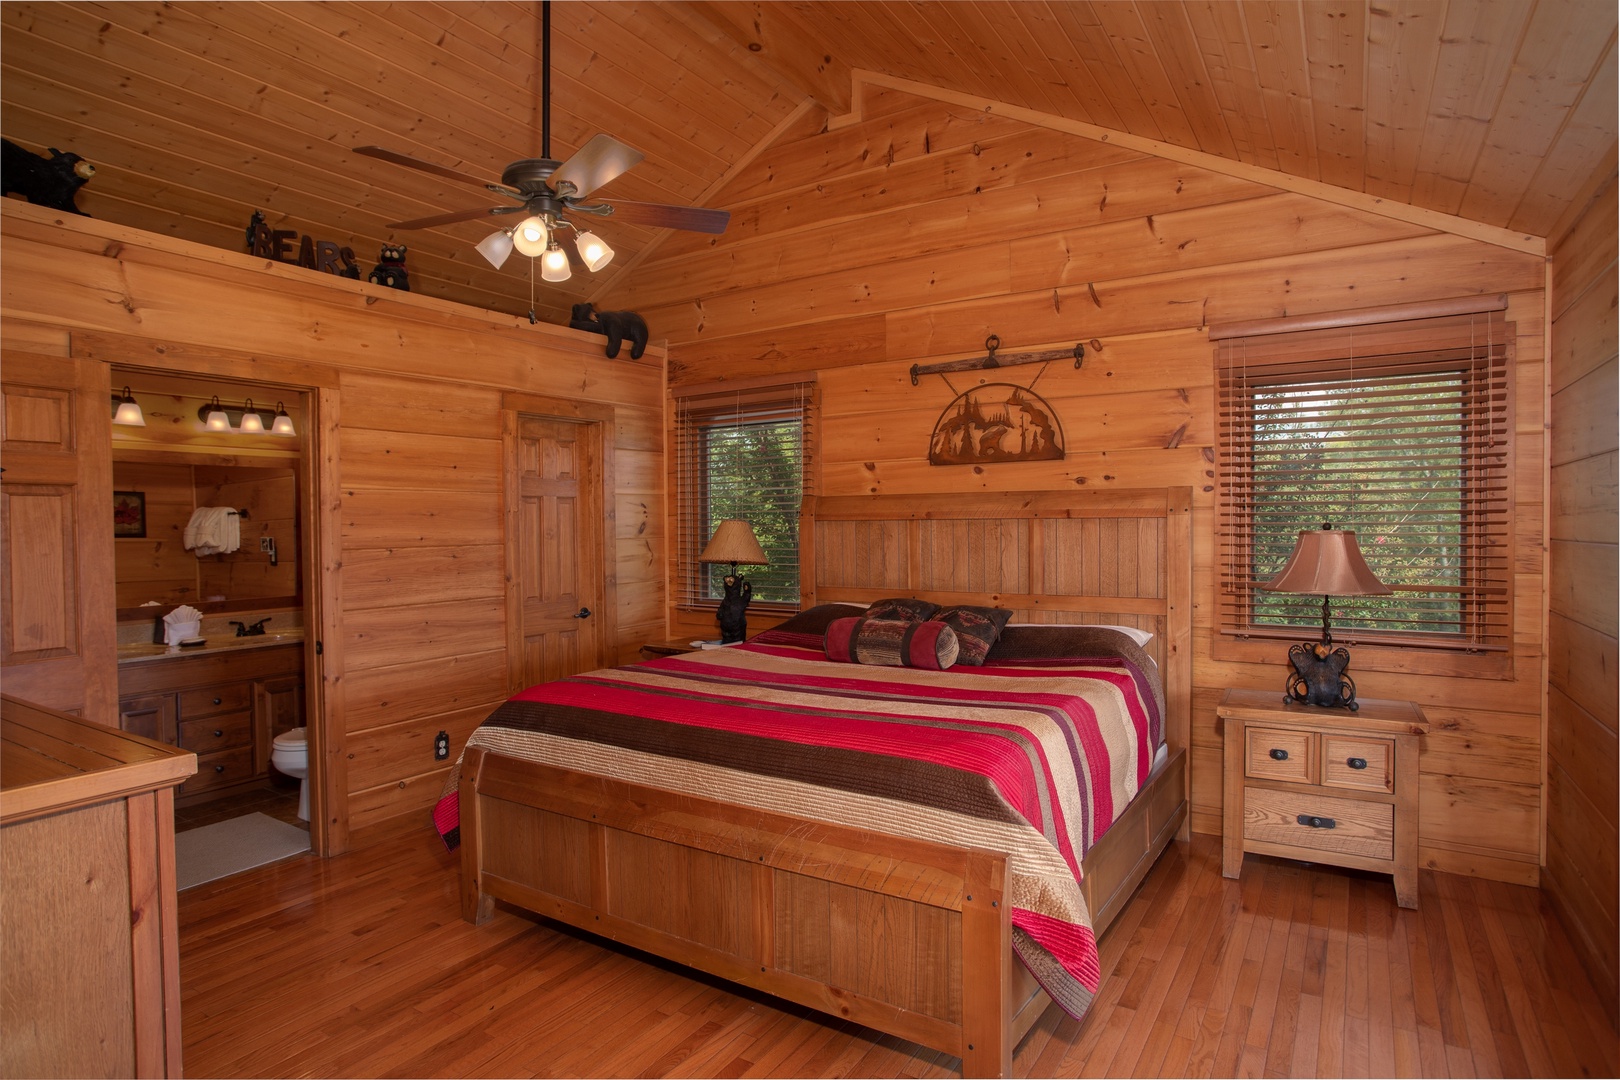 Bedroom with a king-sized wooden bed and vaulted ceilings at Cedar Creeks, a 2-bedroom cabin rental located near Douglas Lake